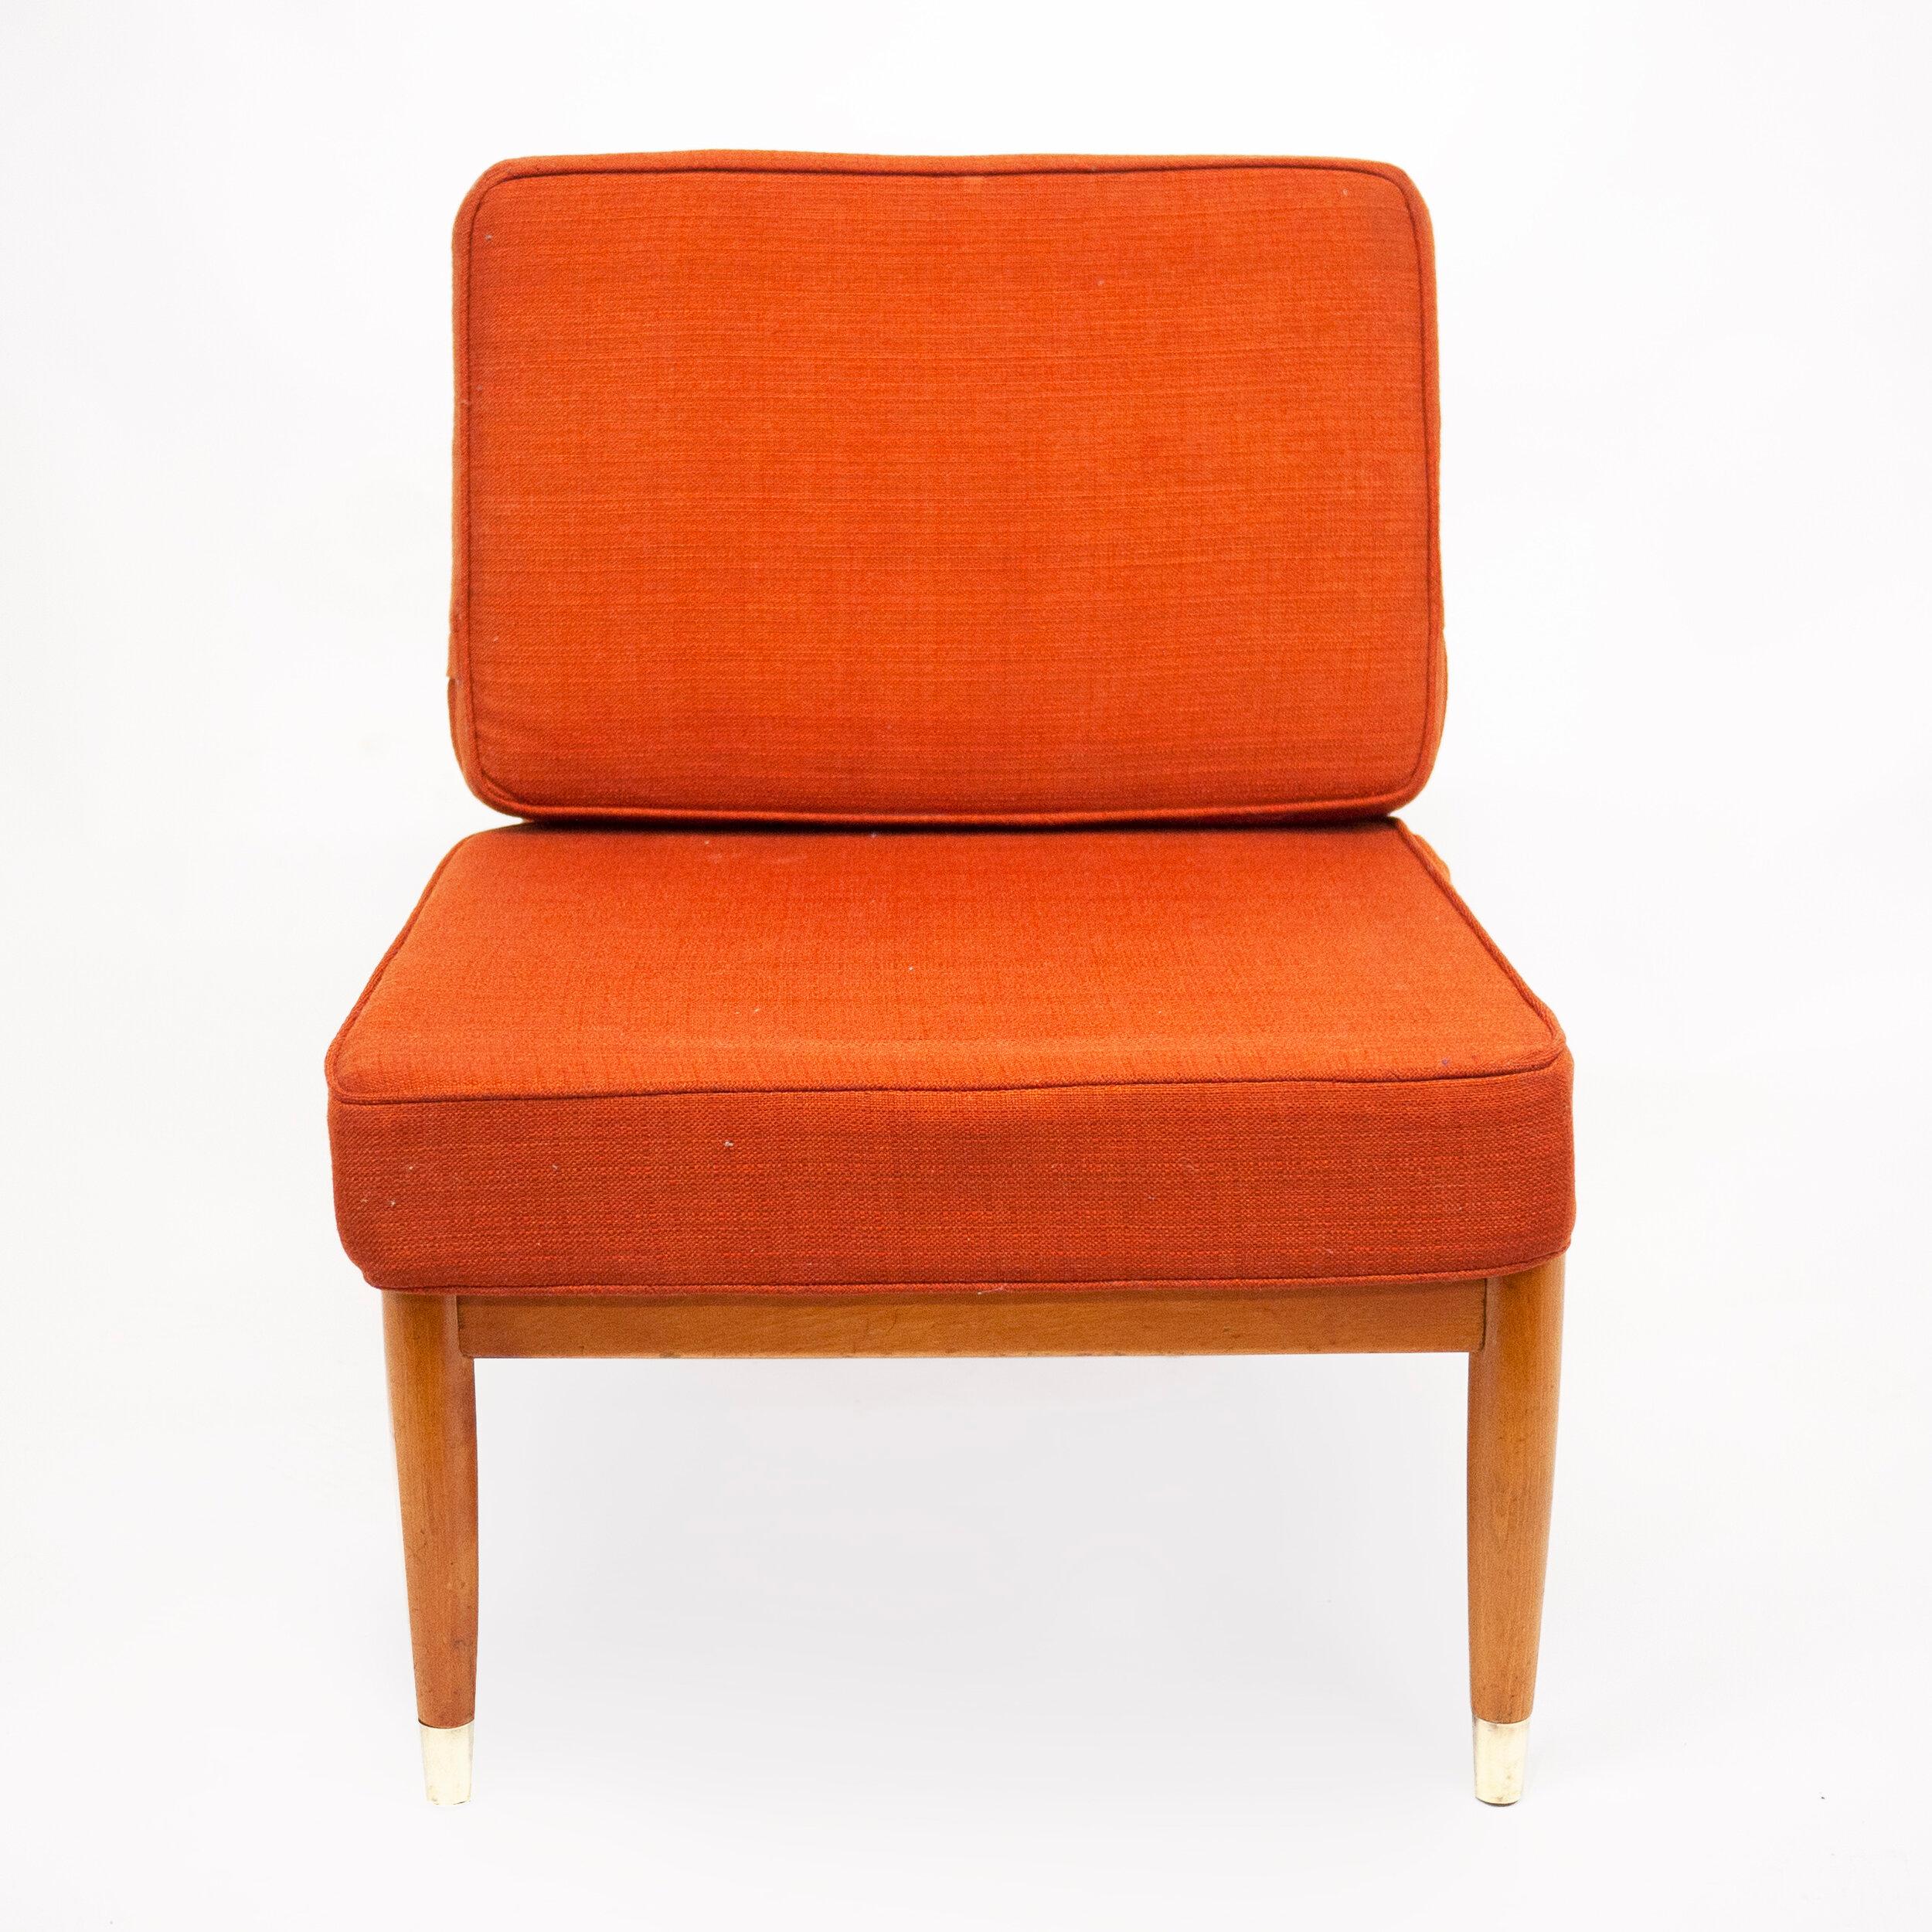 Mid-Century Modern Swedish Beech Low Lounge Chair by Folke Ohlsson for Dux, 1960s For Sale